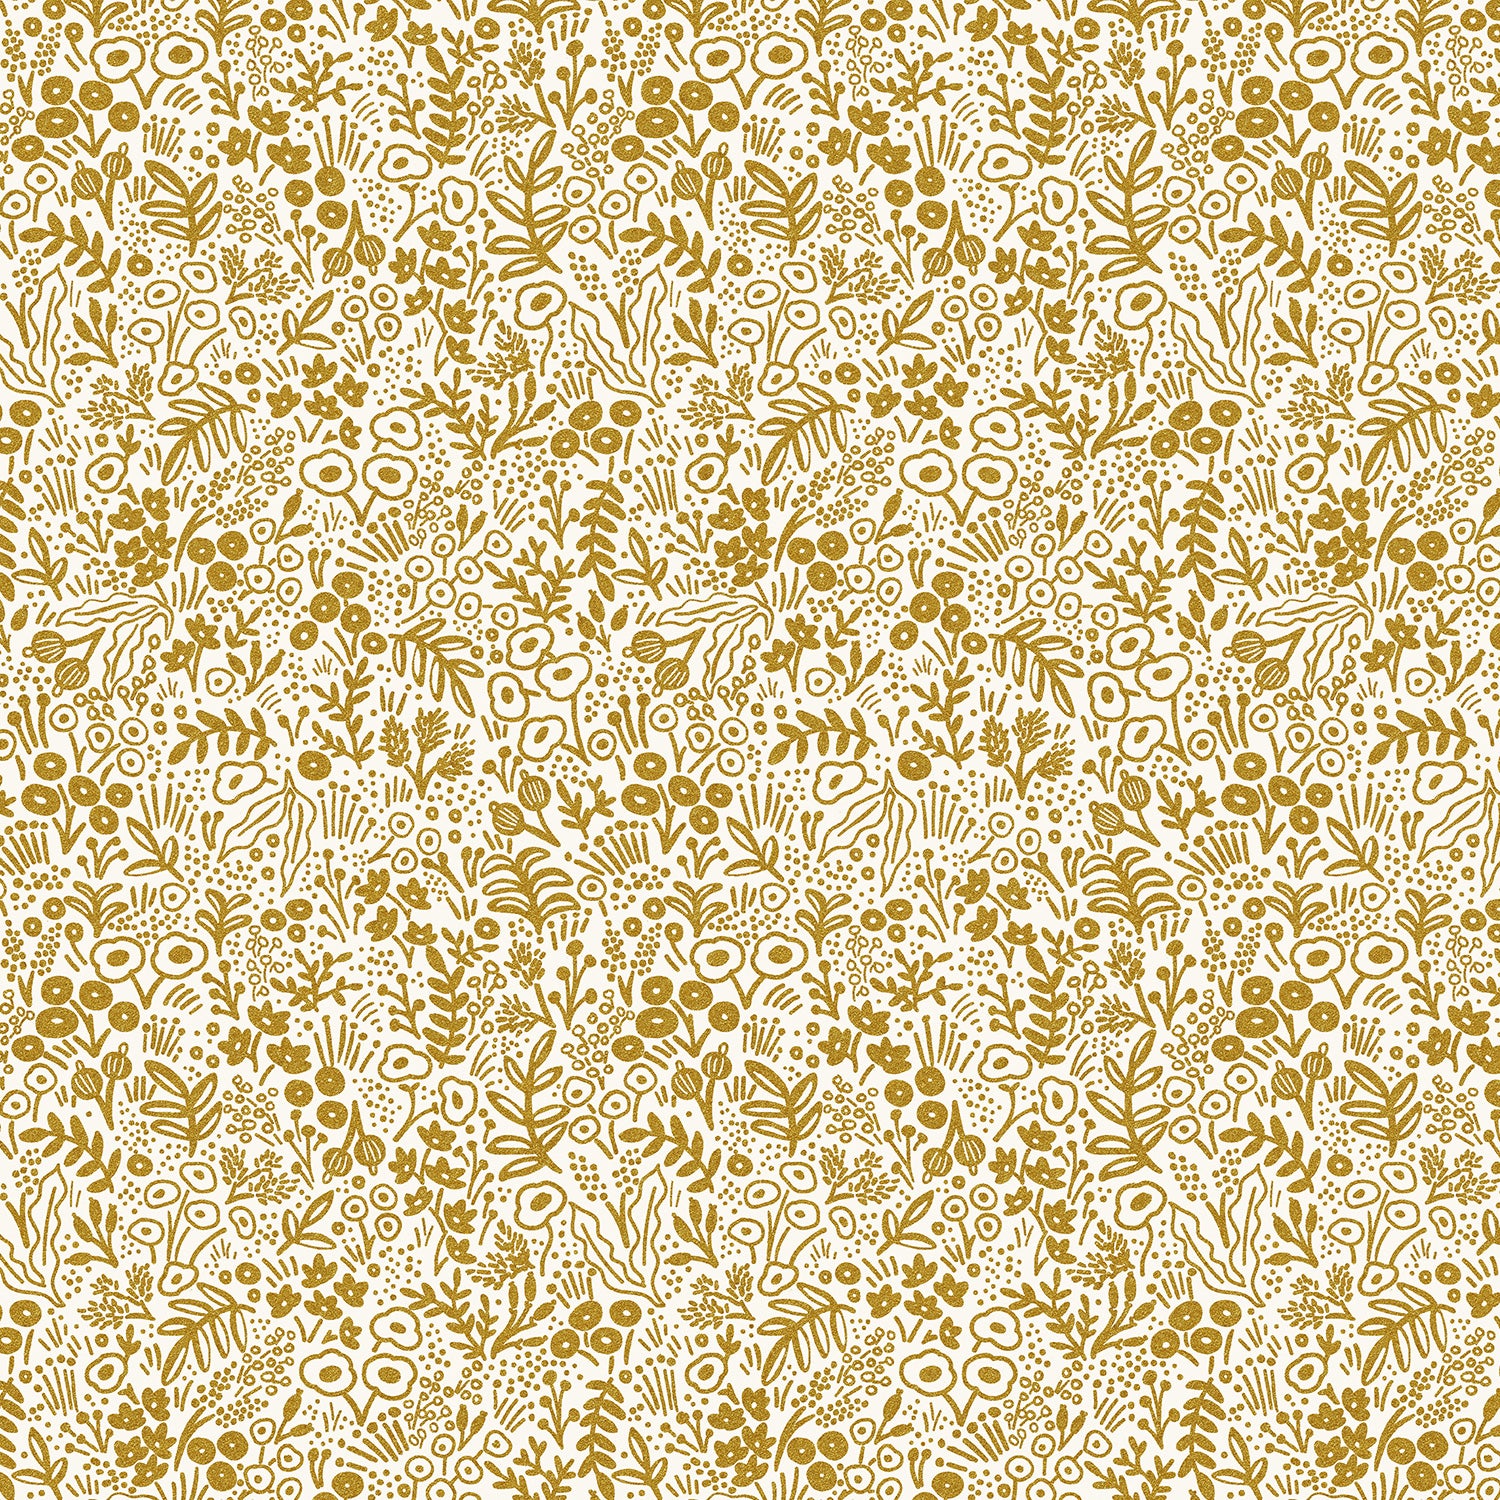 Rifle Paper Co. Basics - Tapestry Lace - Gold Metallic